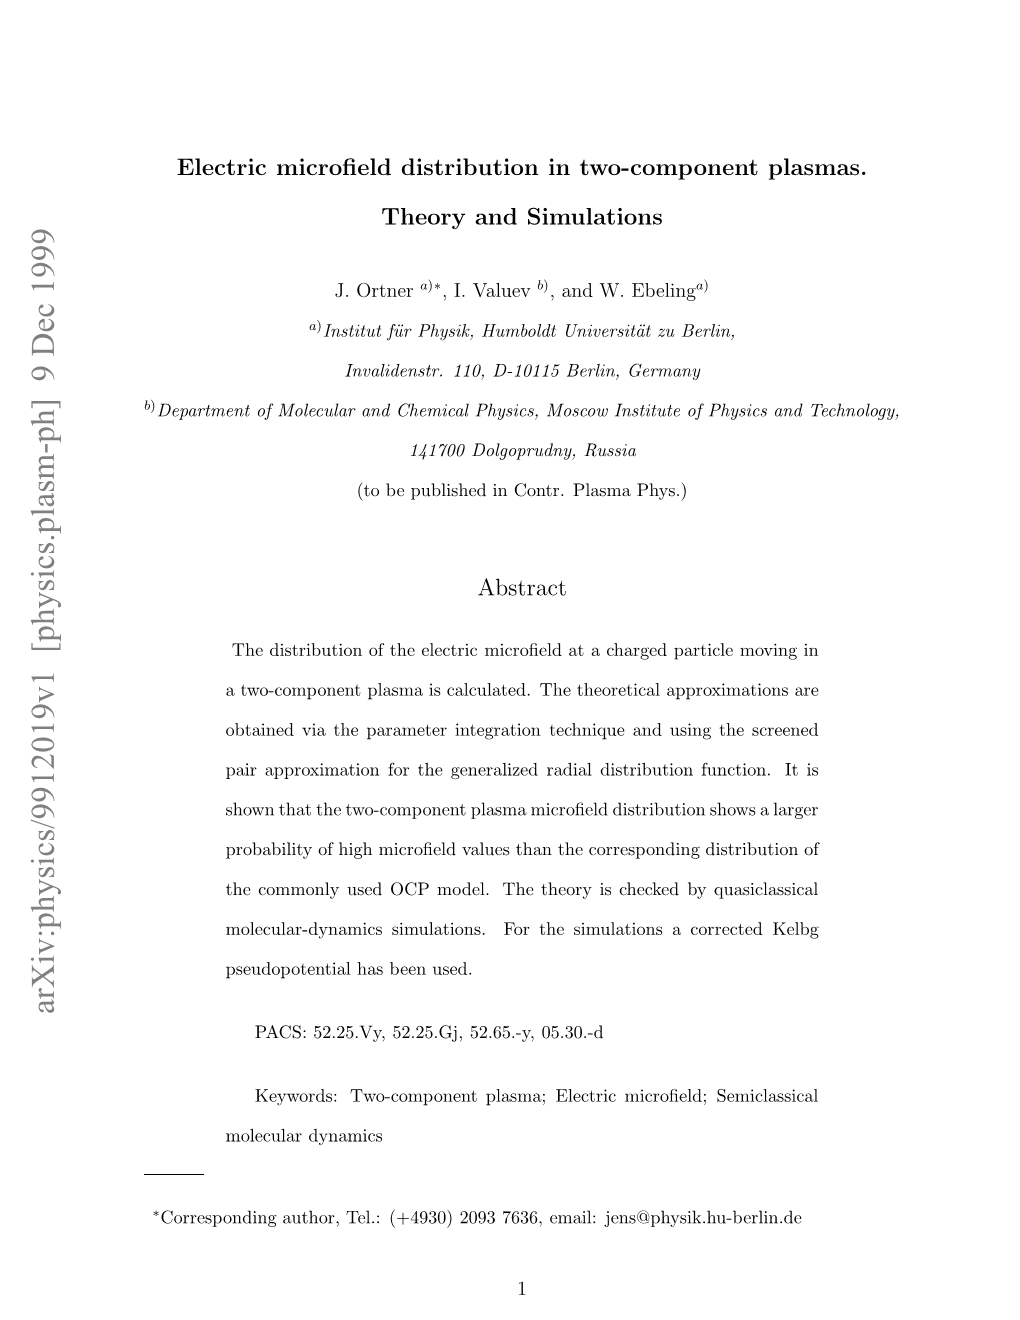 Electric Microfield Distribution in Two-Component Plasmas. Theory